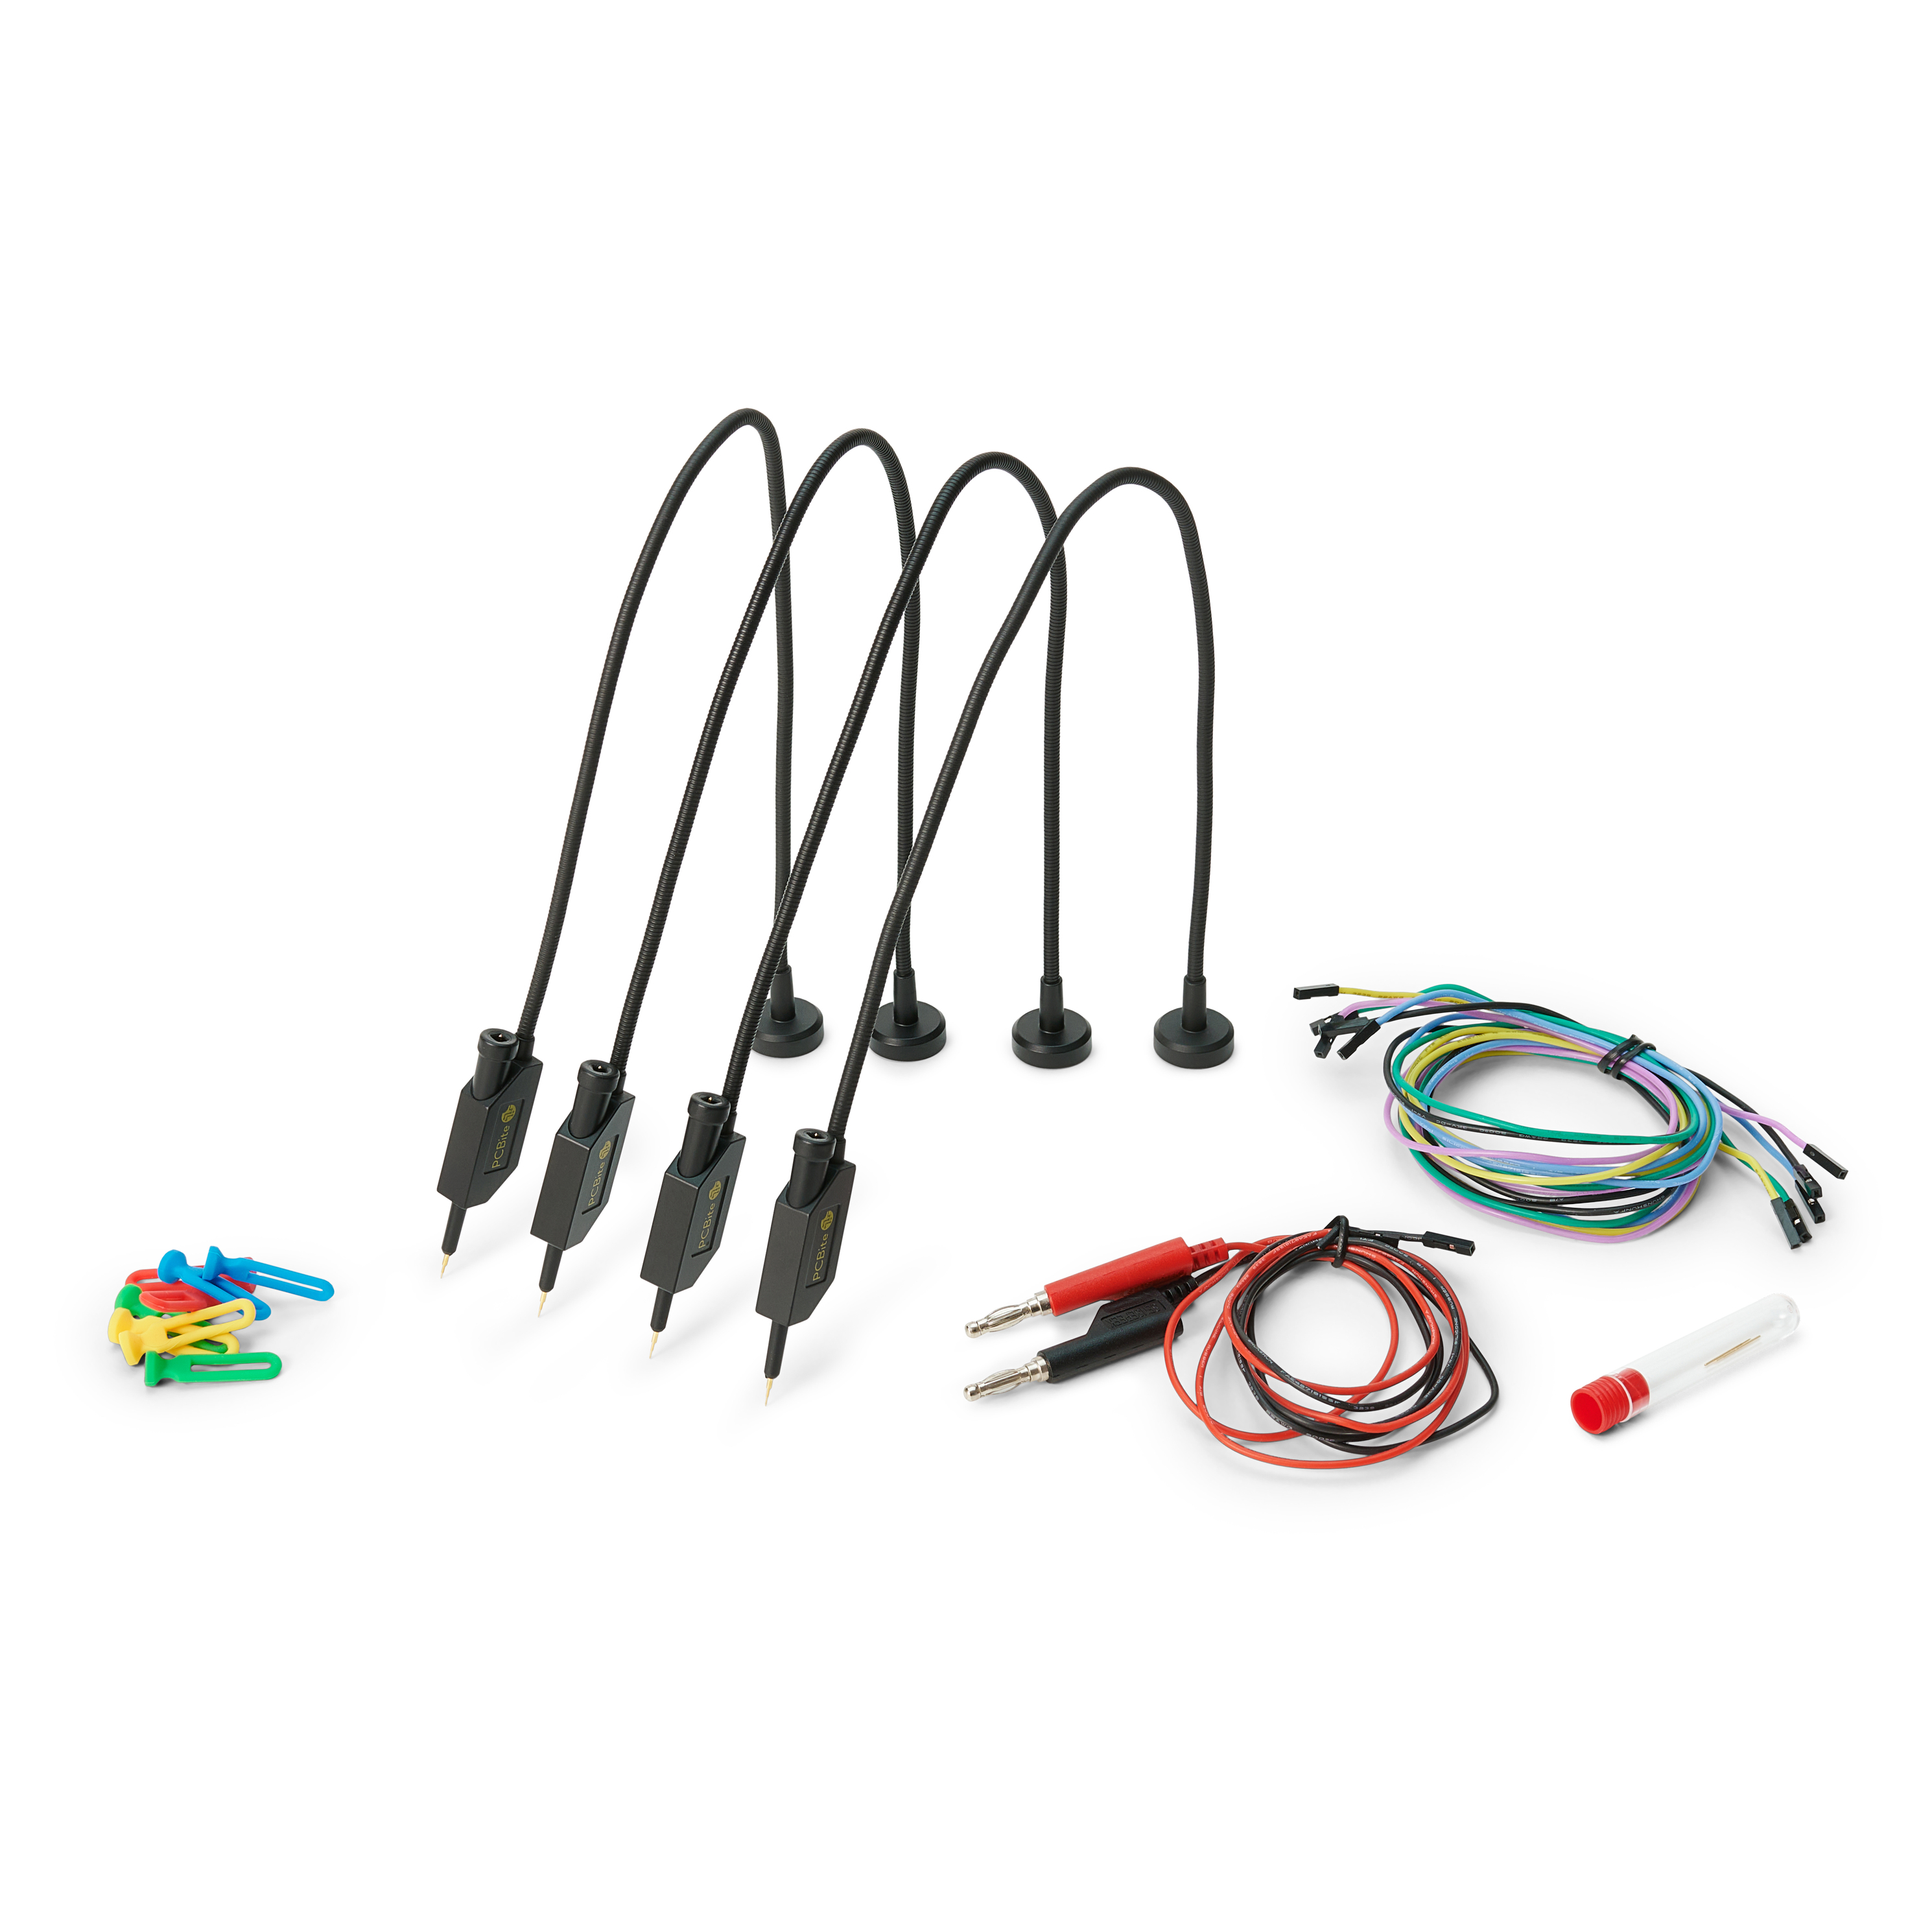 4x SQ10 probes with test wires @ electrokit